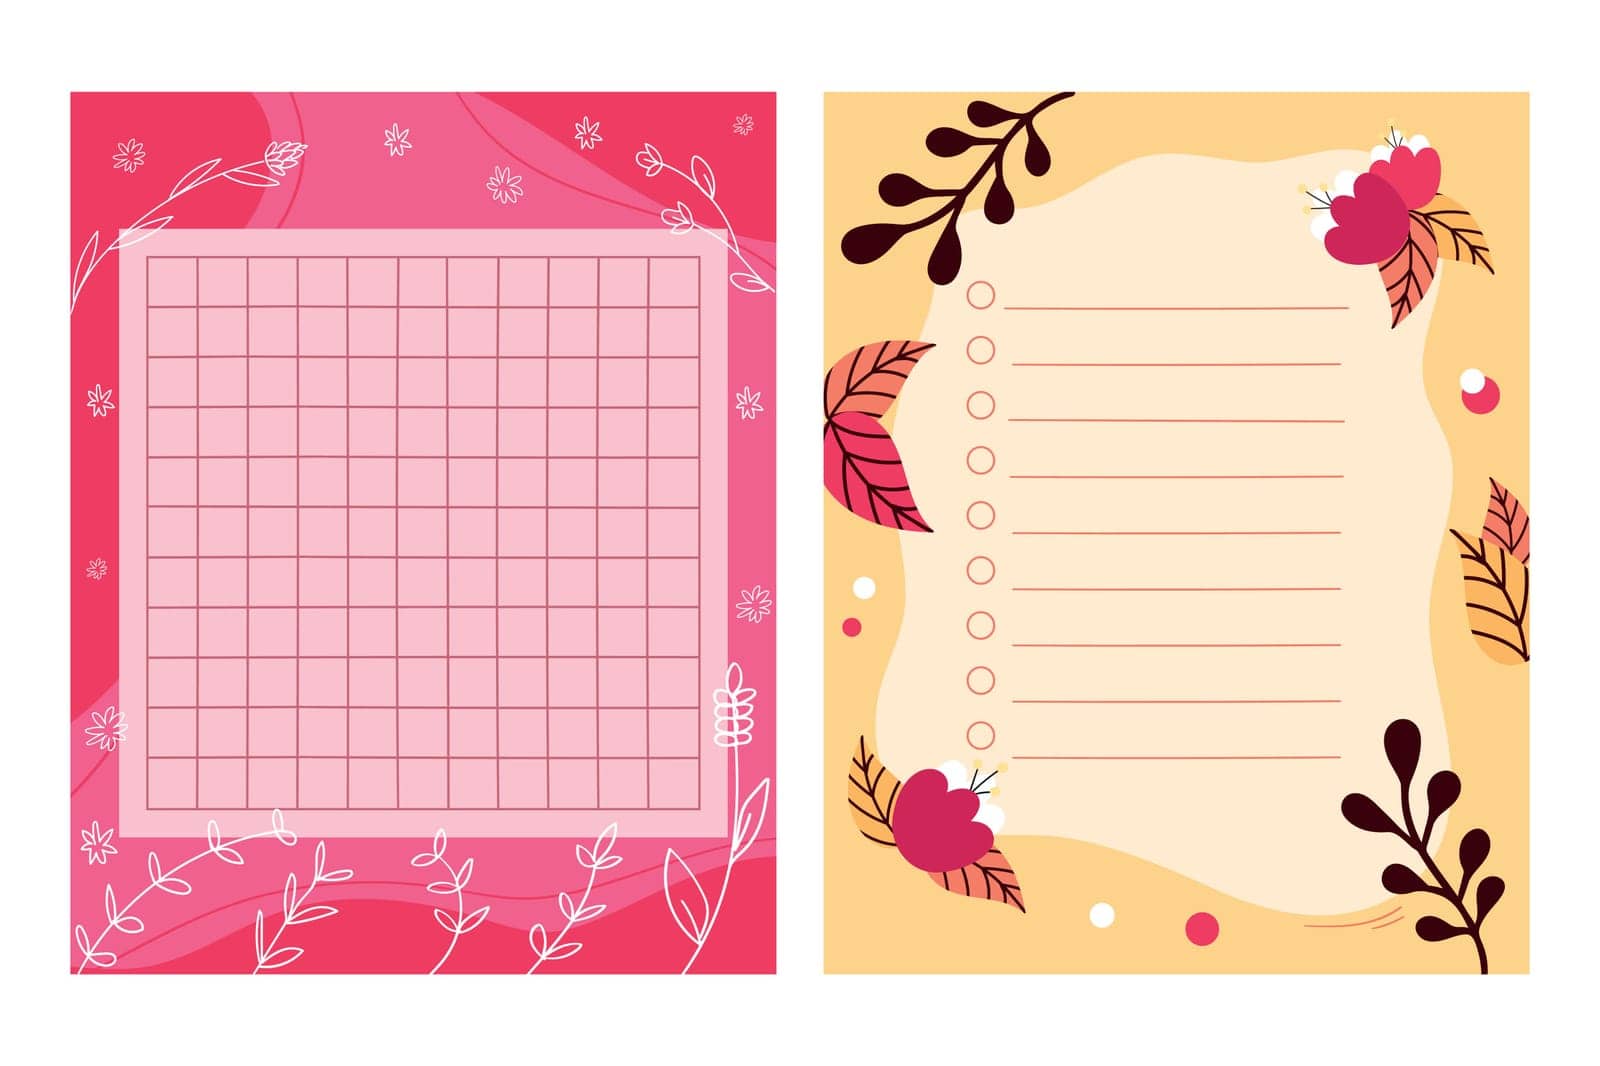 Paper notes set decorated with leaves and flowers. Templates for memo, reminder or to do list. Vector illustration by psychoche